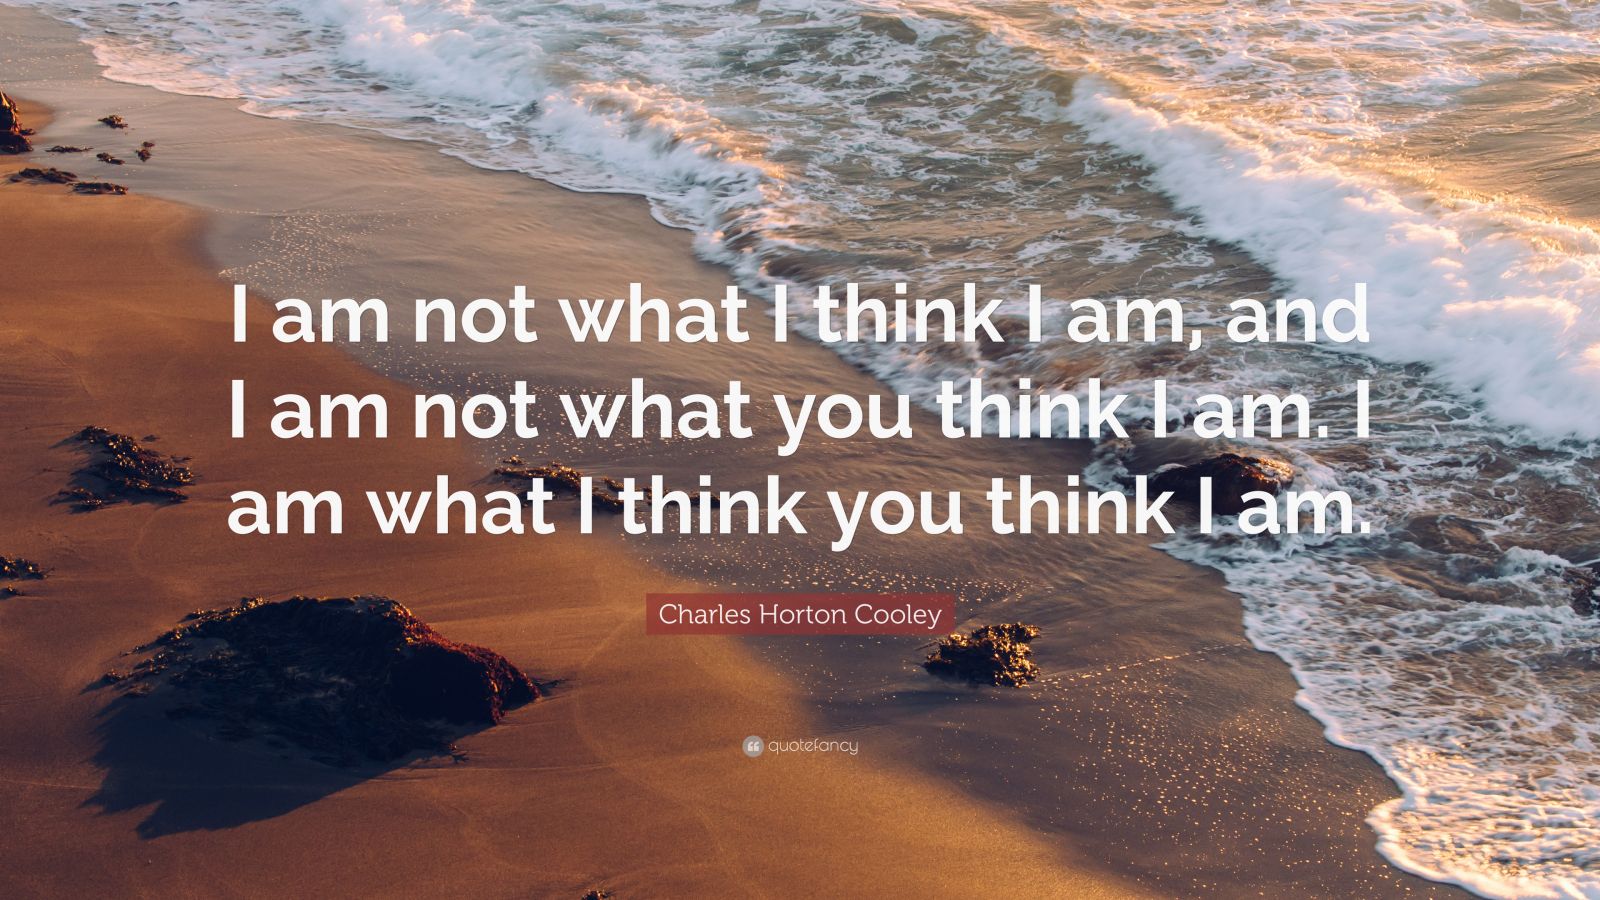 Charles Horton Cooley Quote: “I am not what I think I am, and I am ...